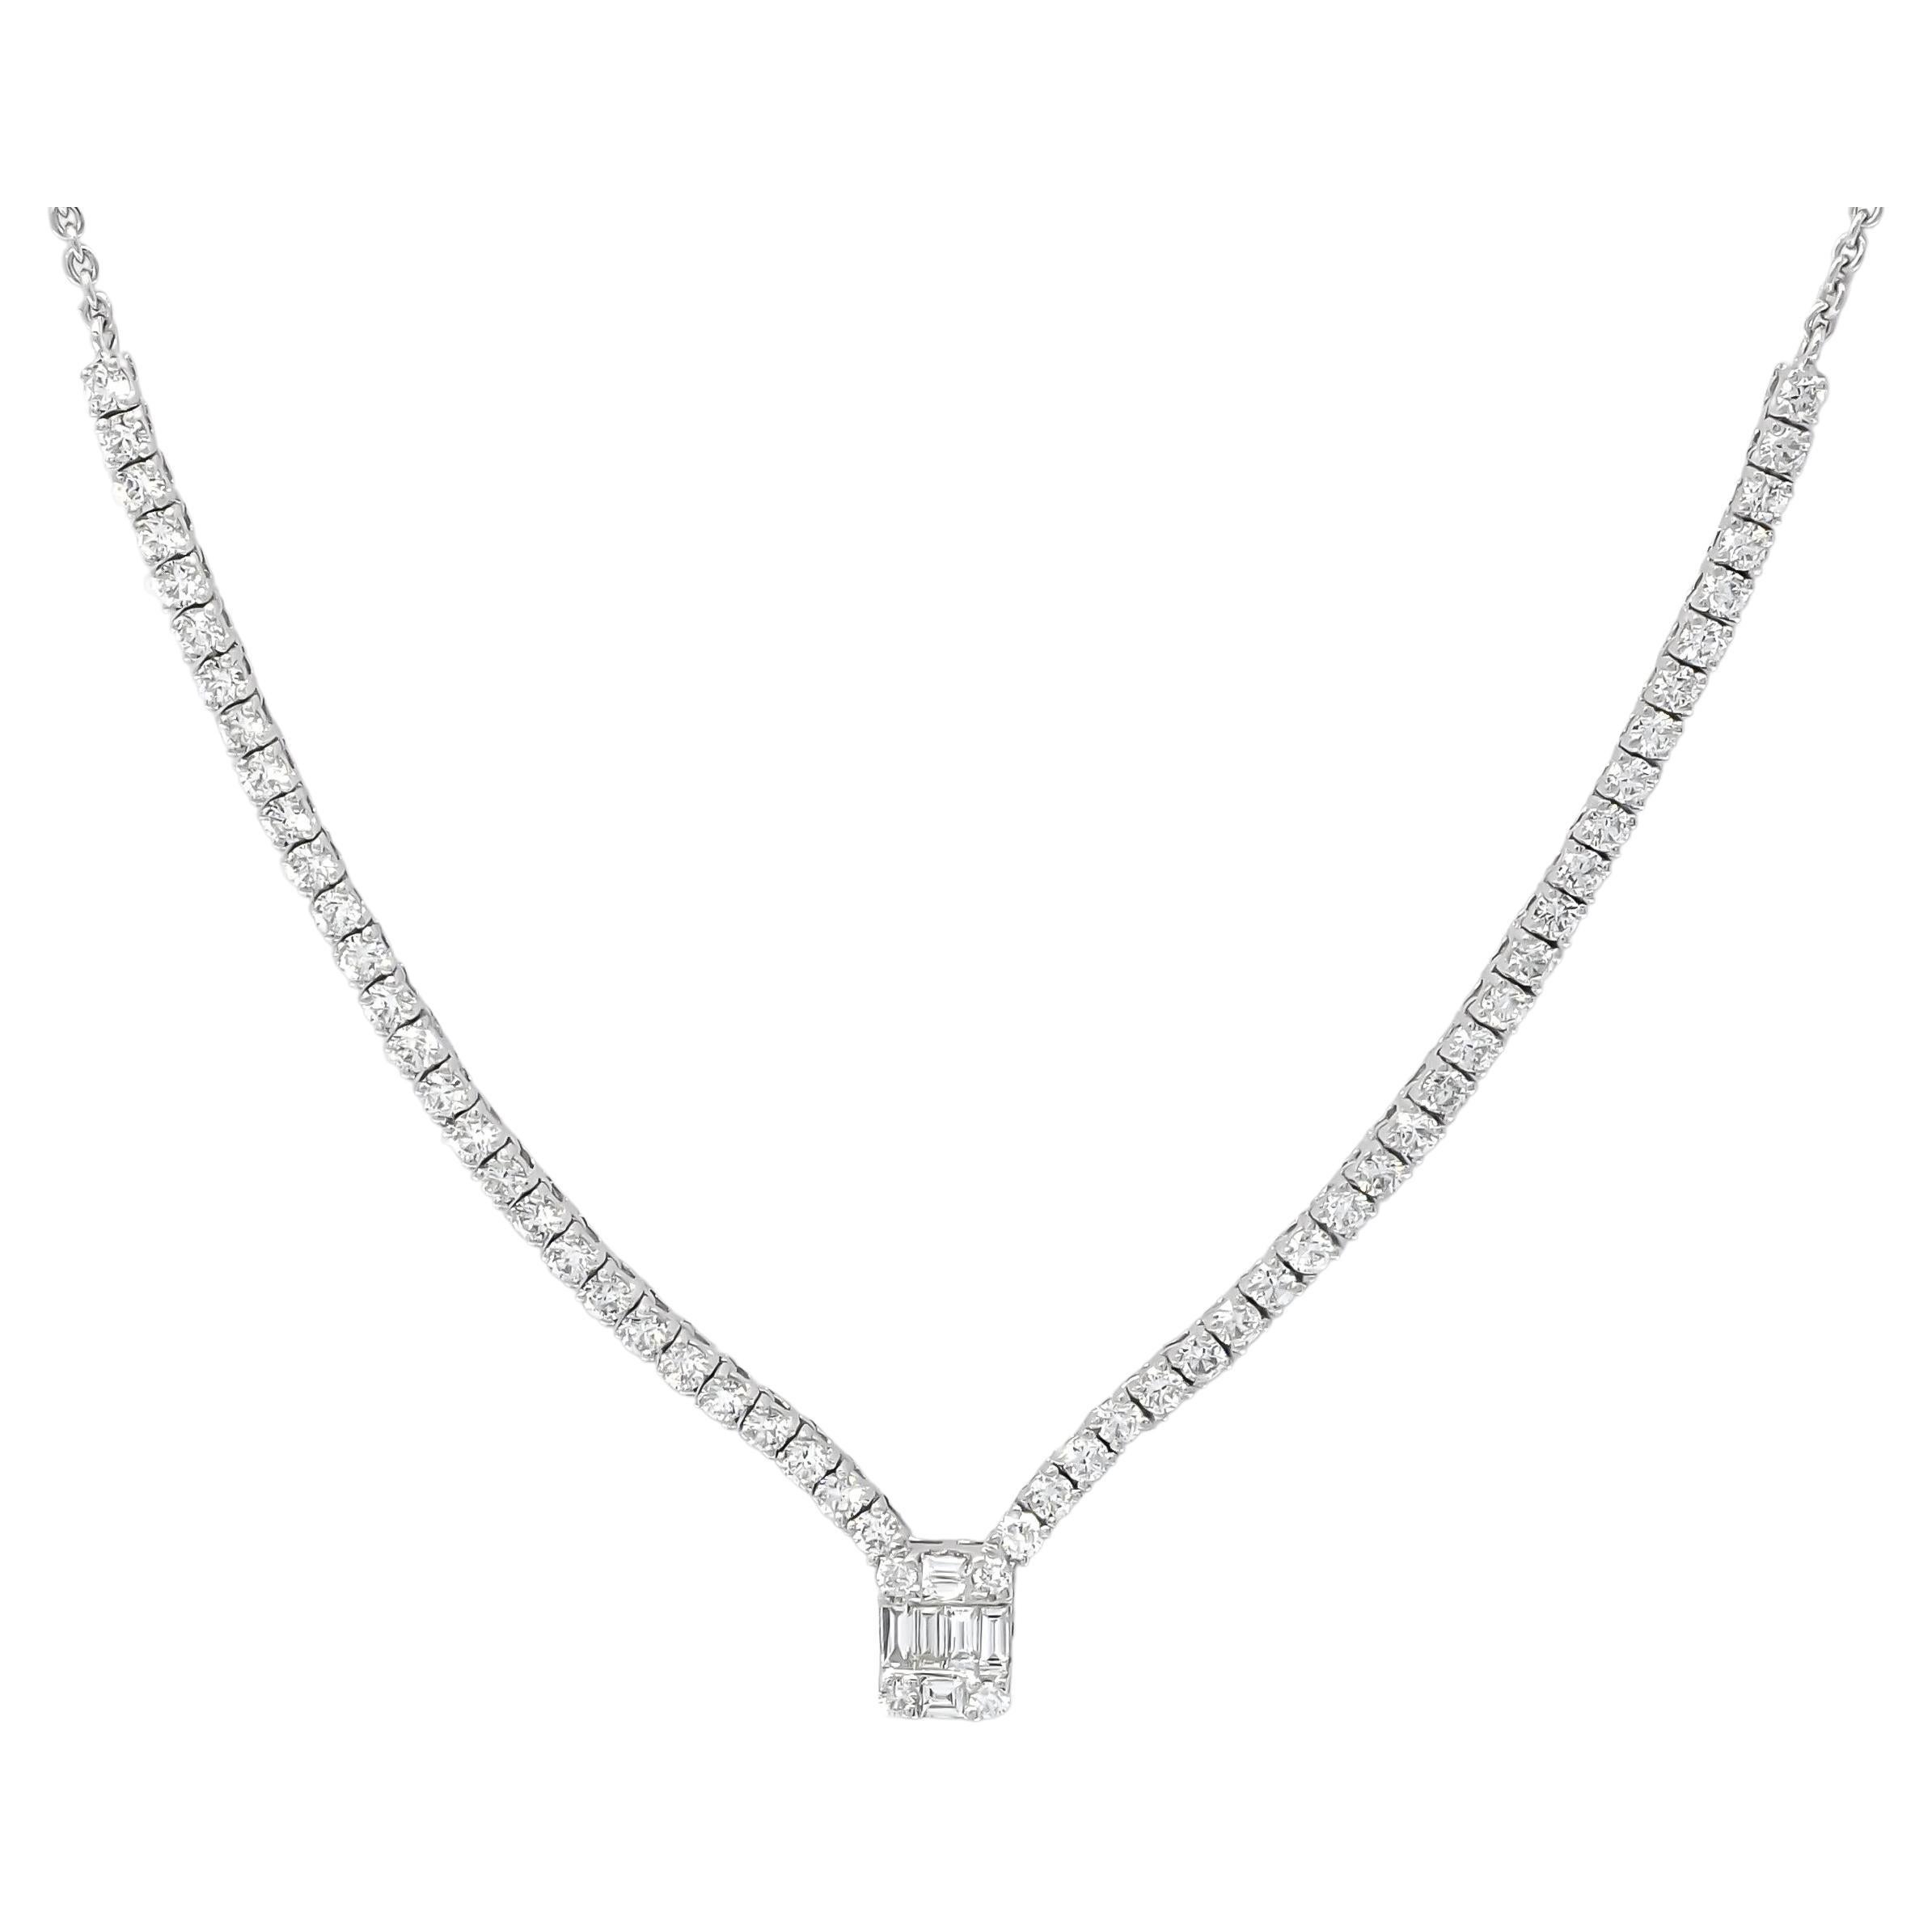 Natural Diamond Necklace 1.64 CT 18Karat White Gold Single Row Tennis Necklace For Sale